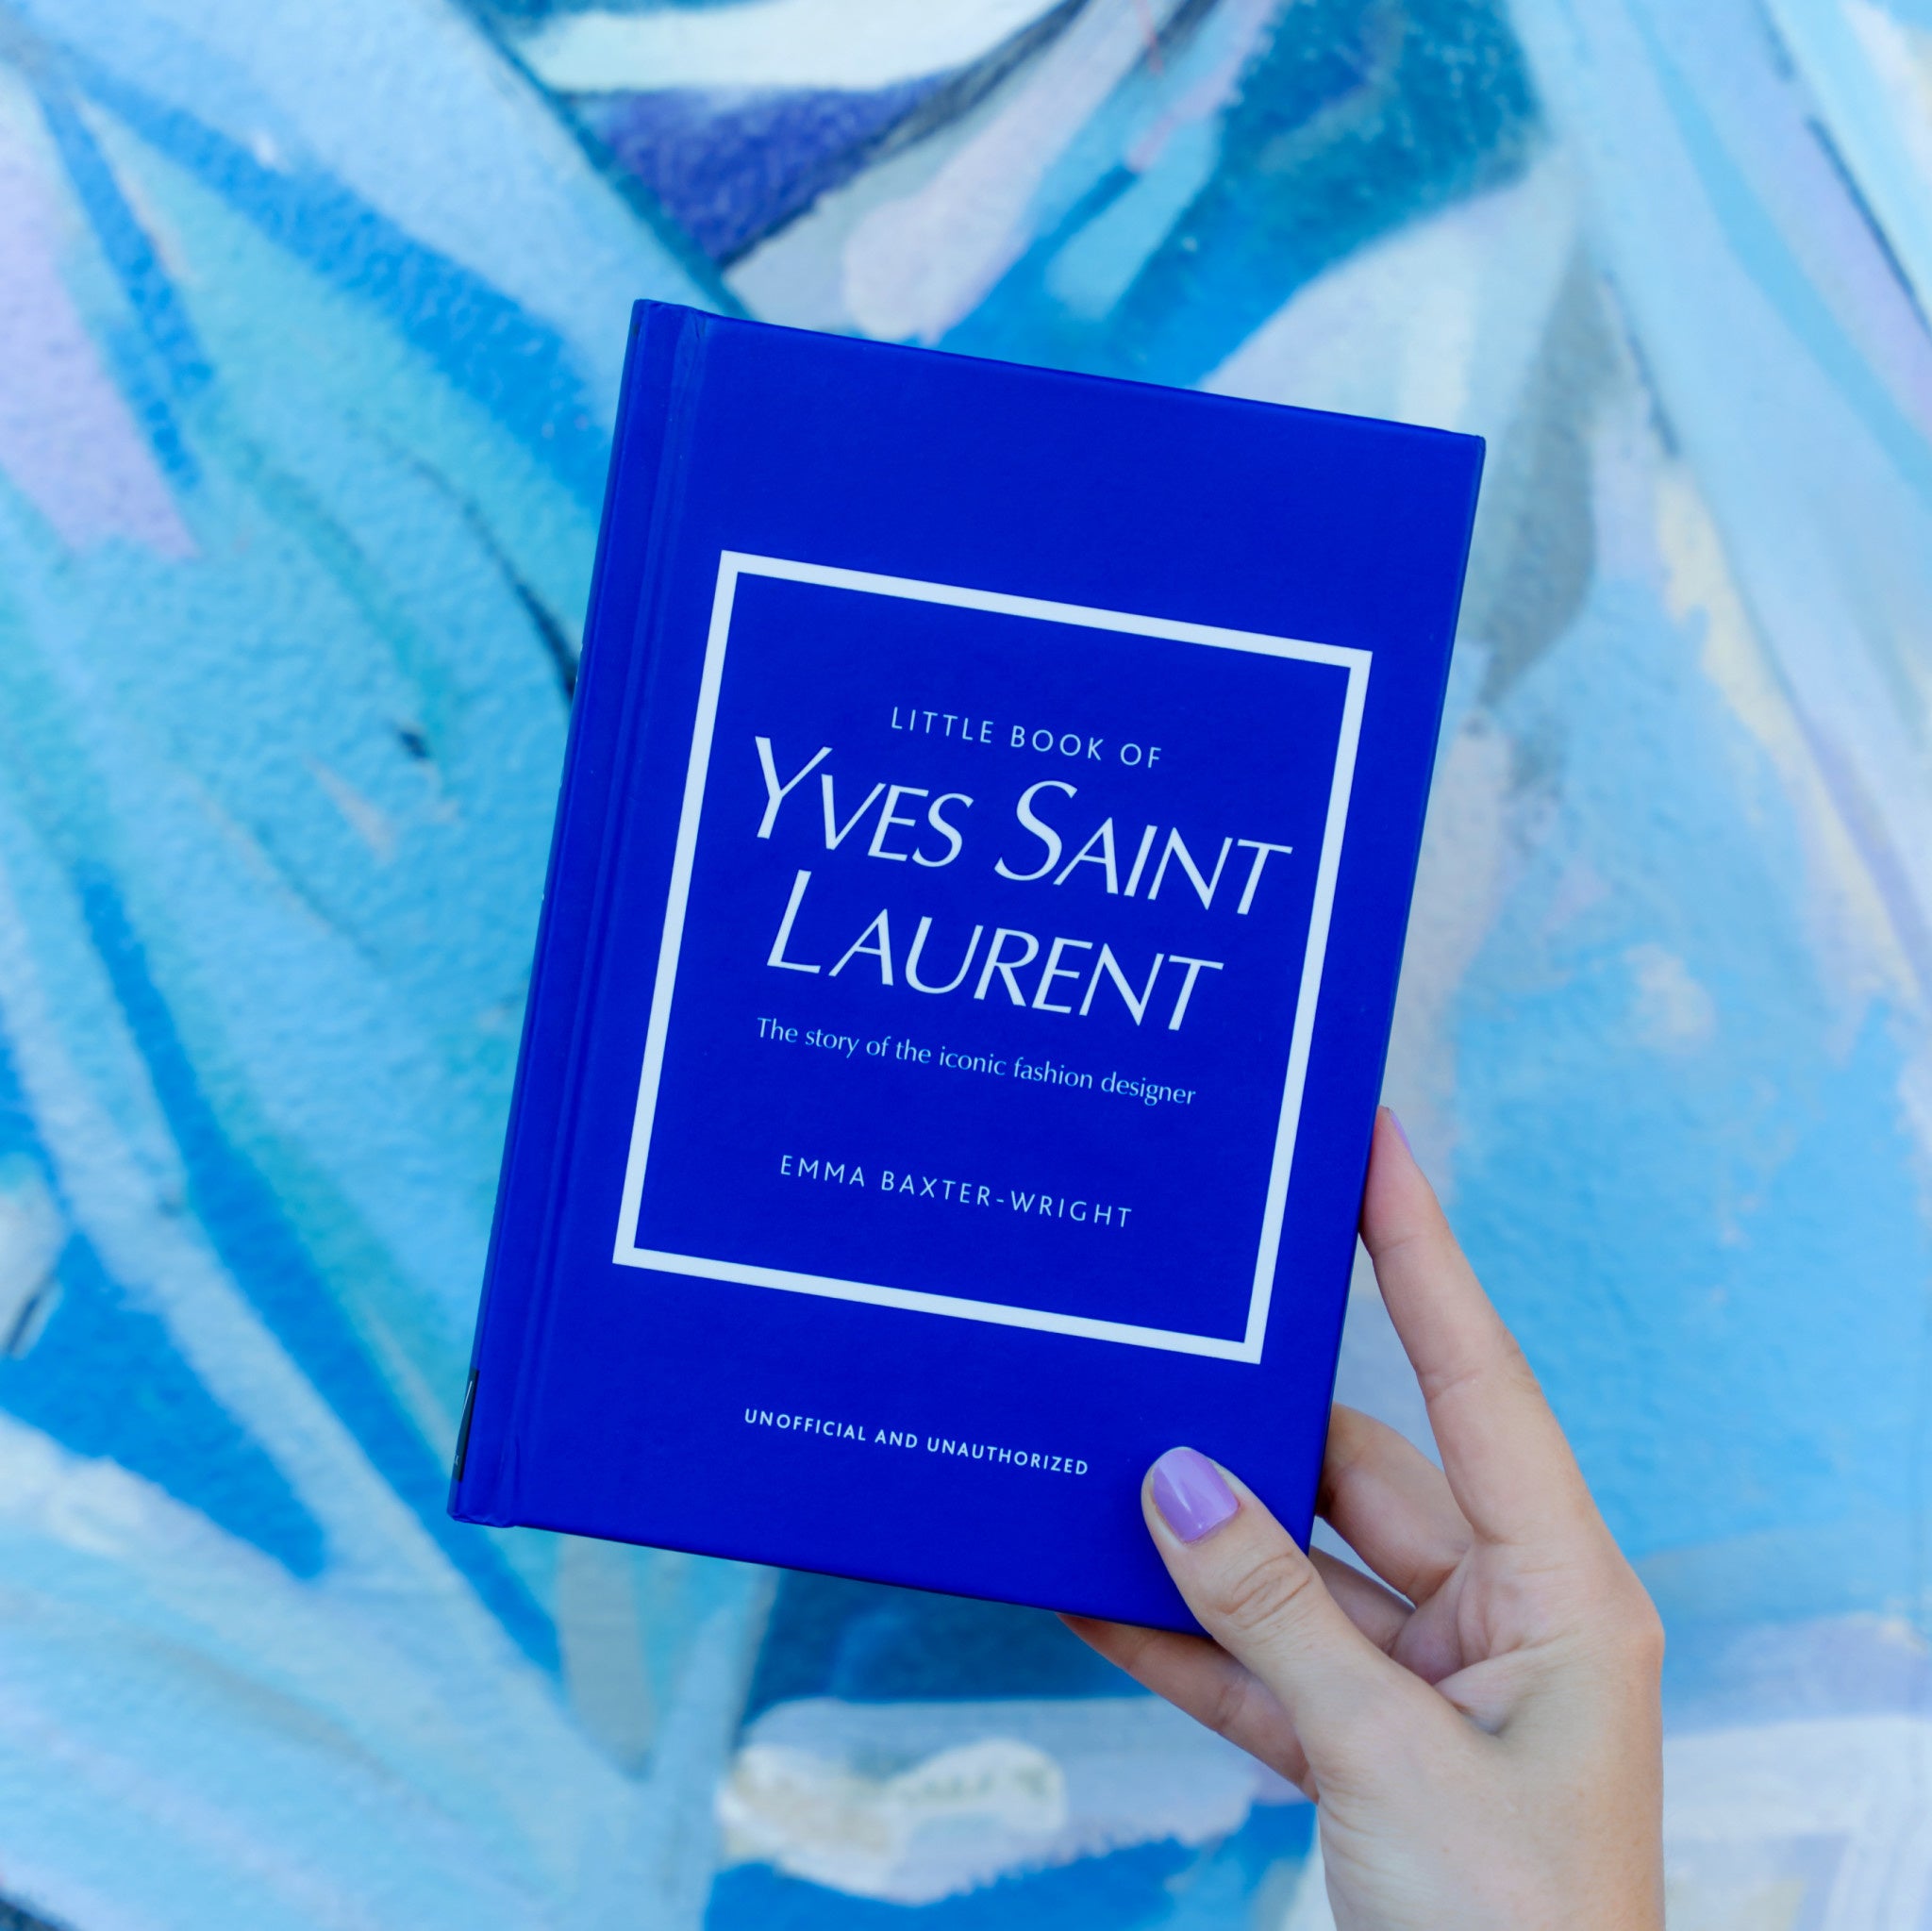 Little Book of Yves Saint Laurent: The Story of the Iconic Fashion